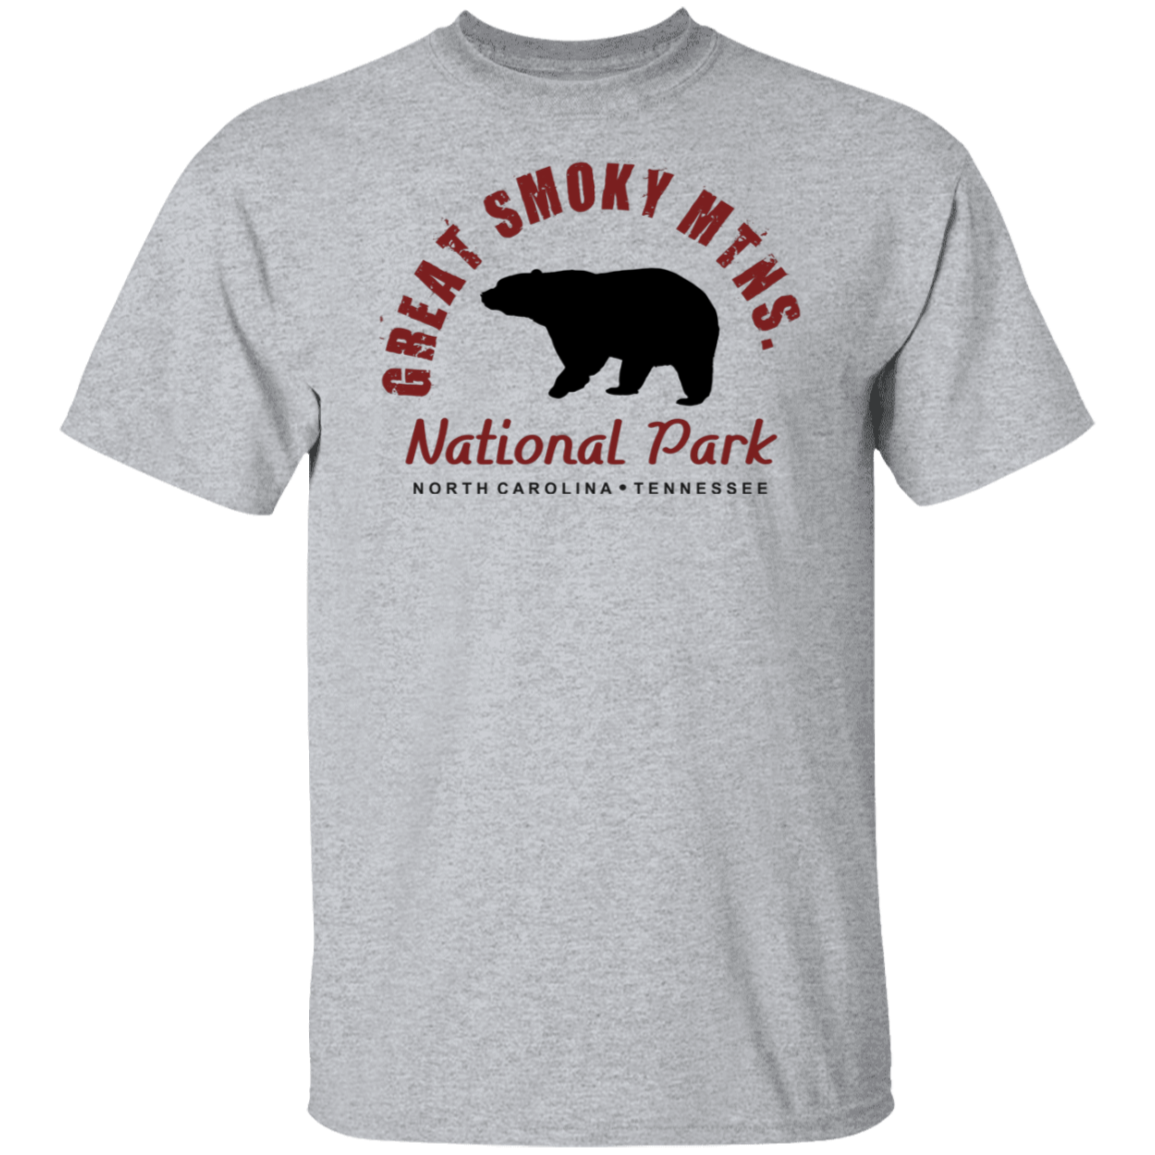 Great Smoky Mtns. National Park T-Shirt